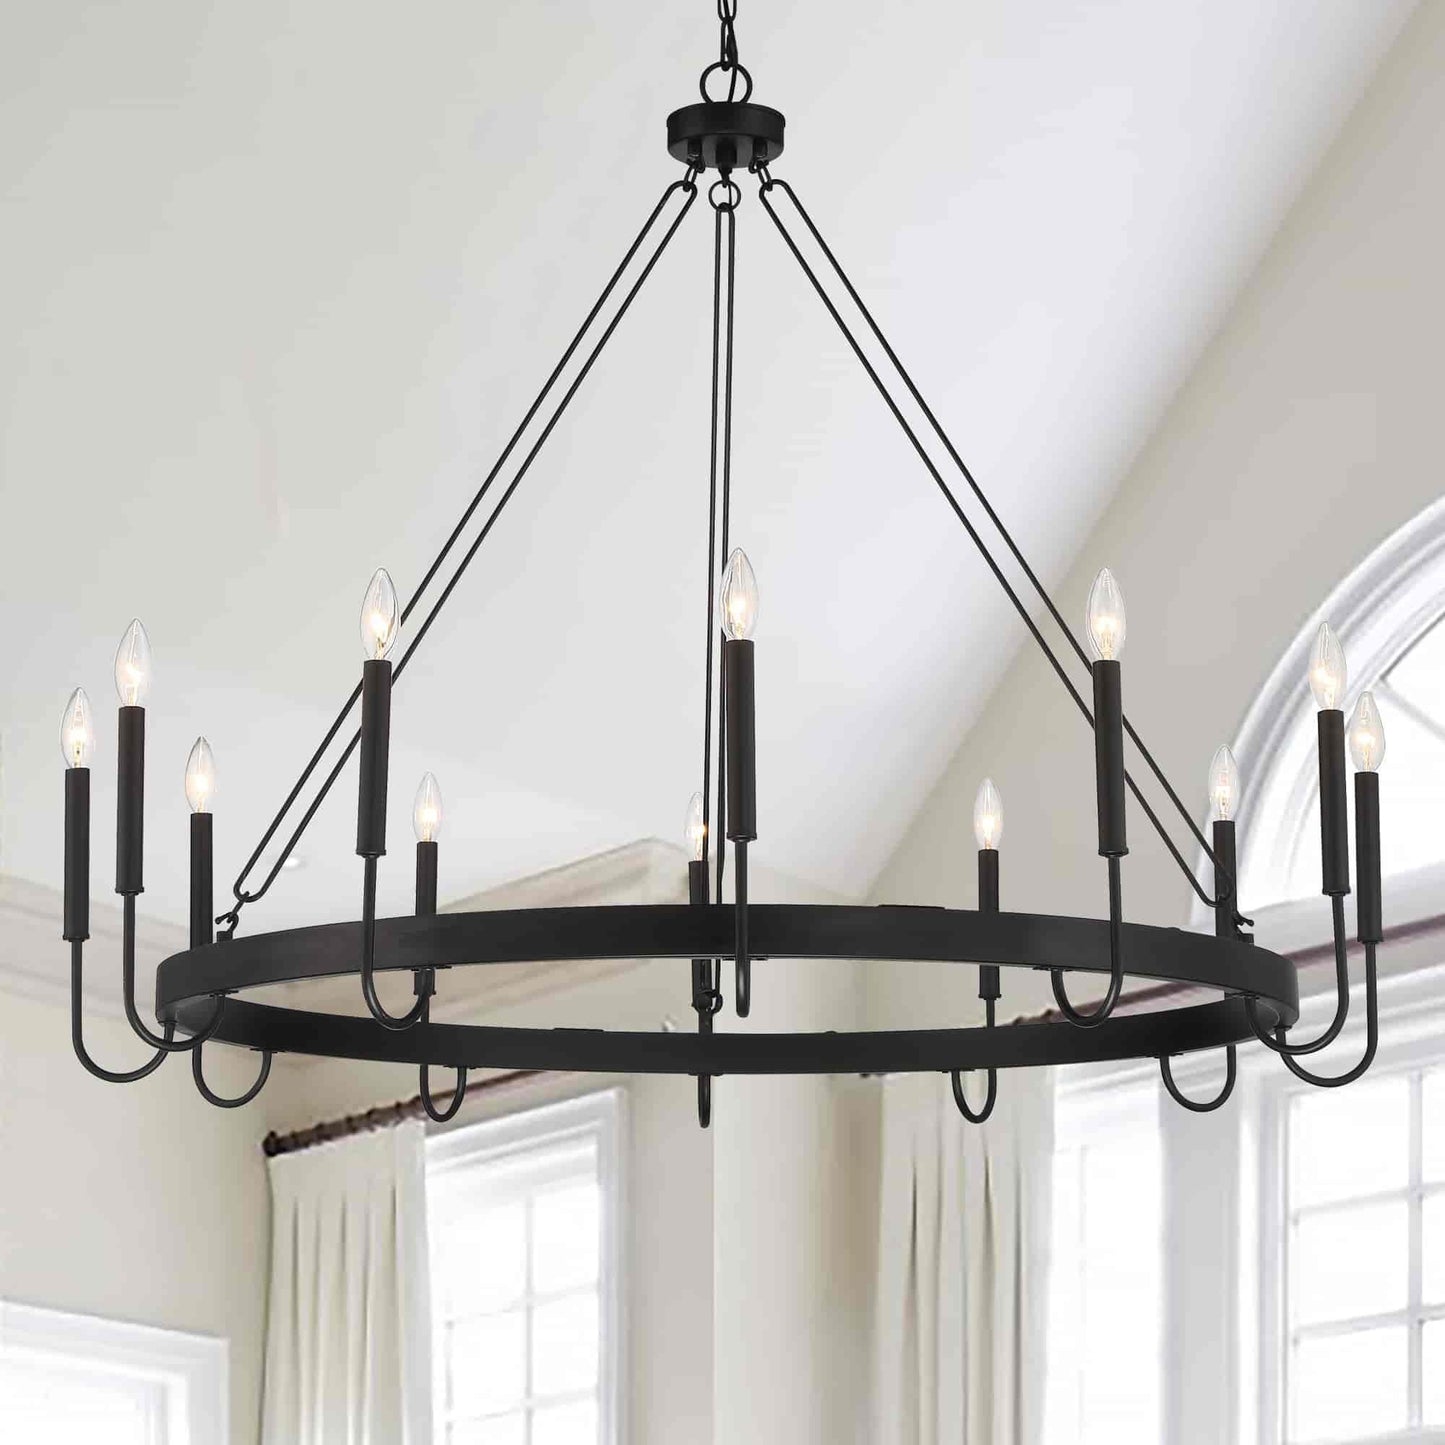 12 light candle style wagon wheel chain chandelier (9) by ACROMA